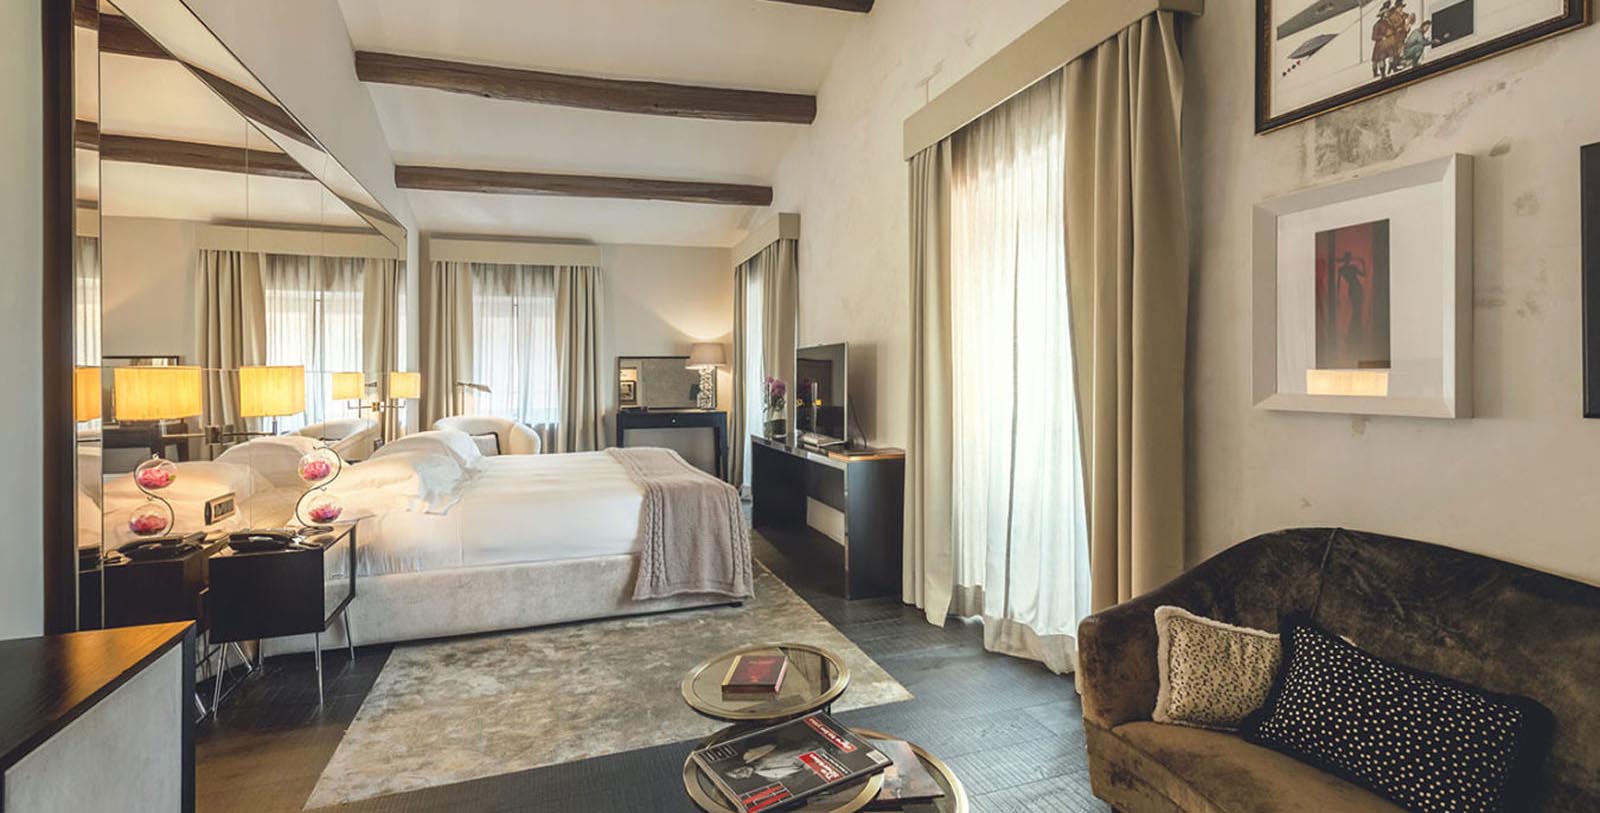 Image of Guestroom, DOM Hotel, 1600, Historic Hotels Worldwide, Rome, Italy, Accommodations